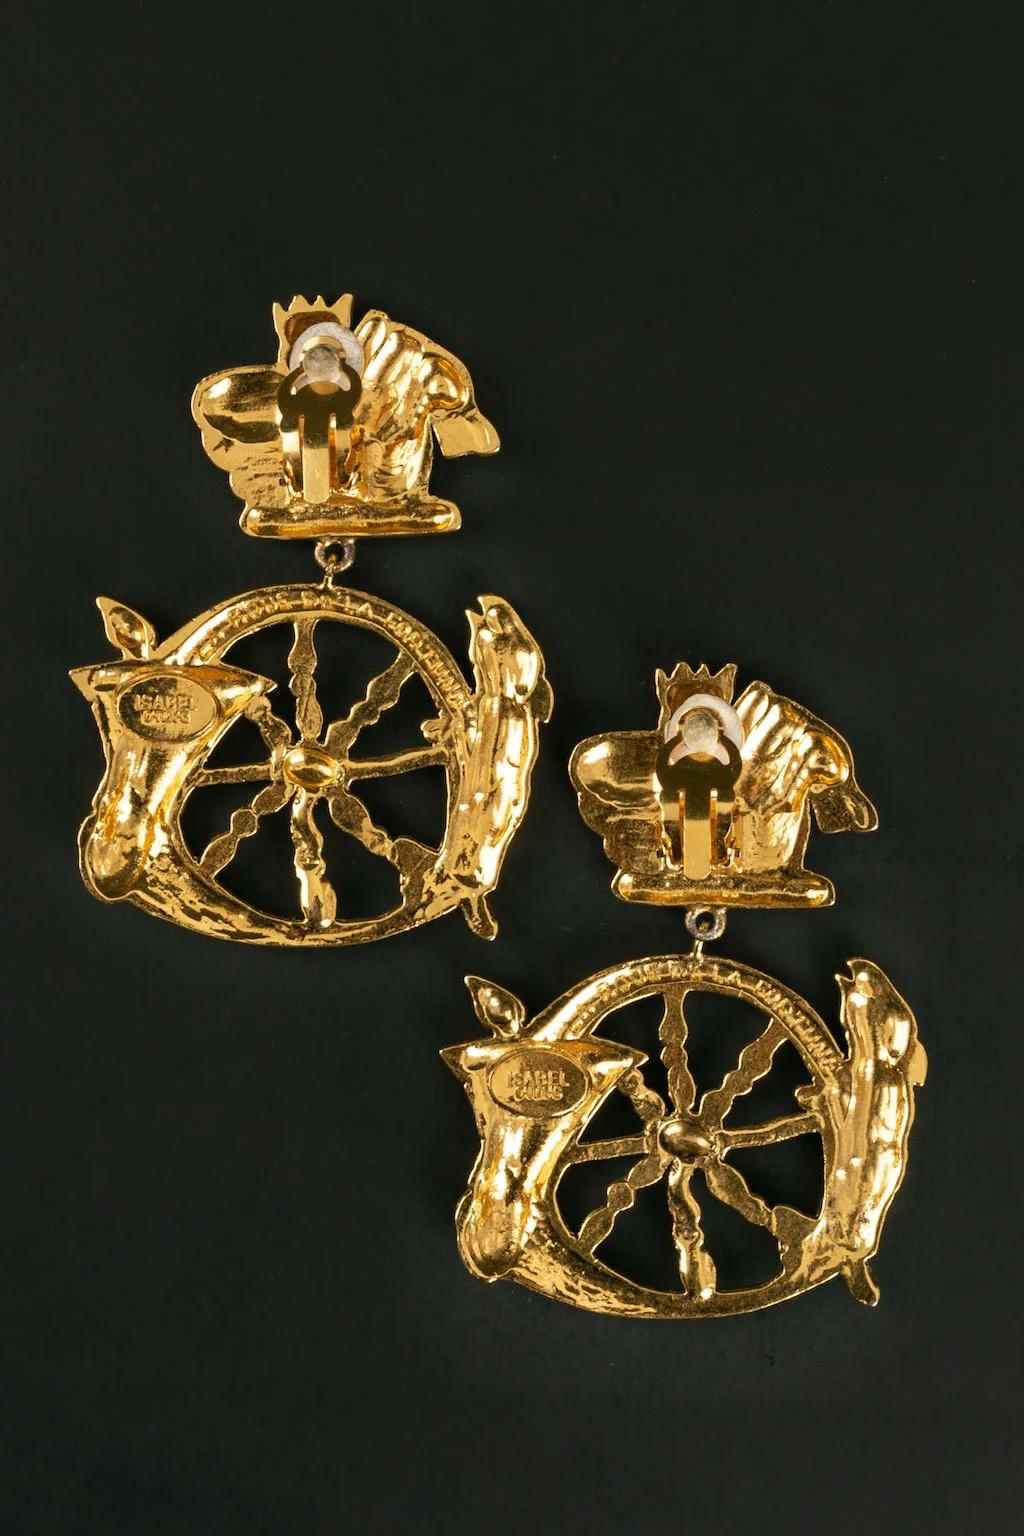 Isabel Canovas -Golden metal earrings on the theme of the wheel of Fortune.

Additional information:
Dimensions: 5 W x 6.5 H cm

Condition: 
Very good condition

Seller Ref number: BO212